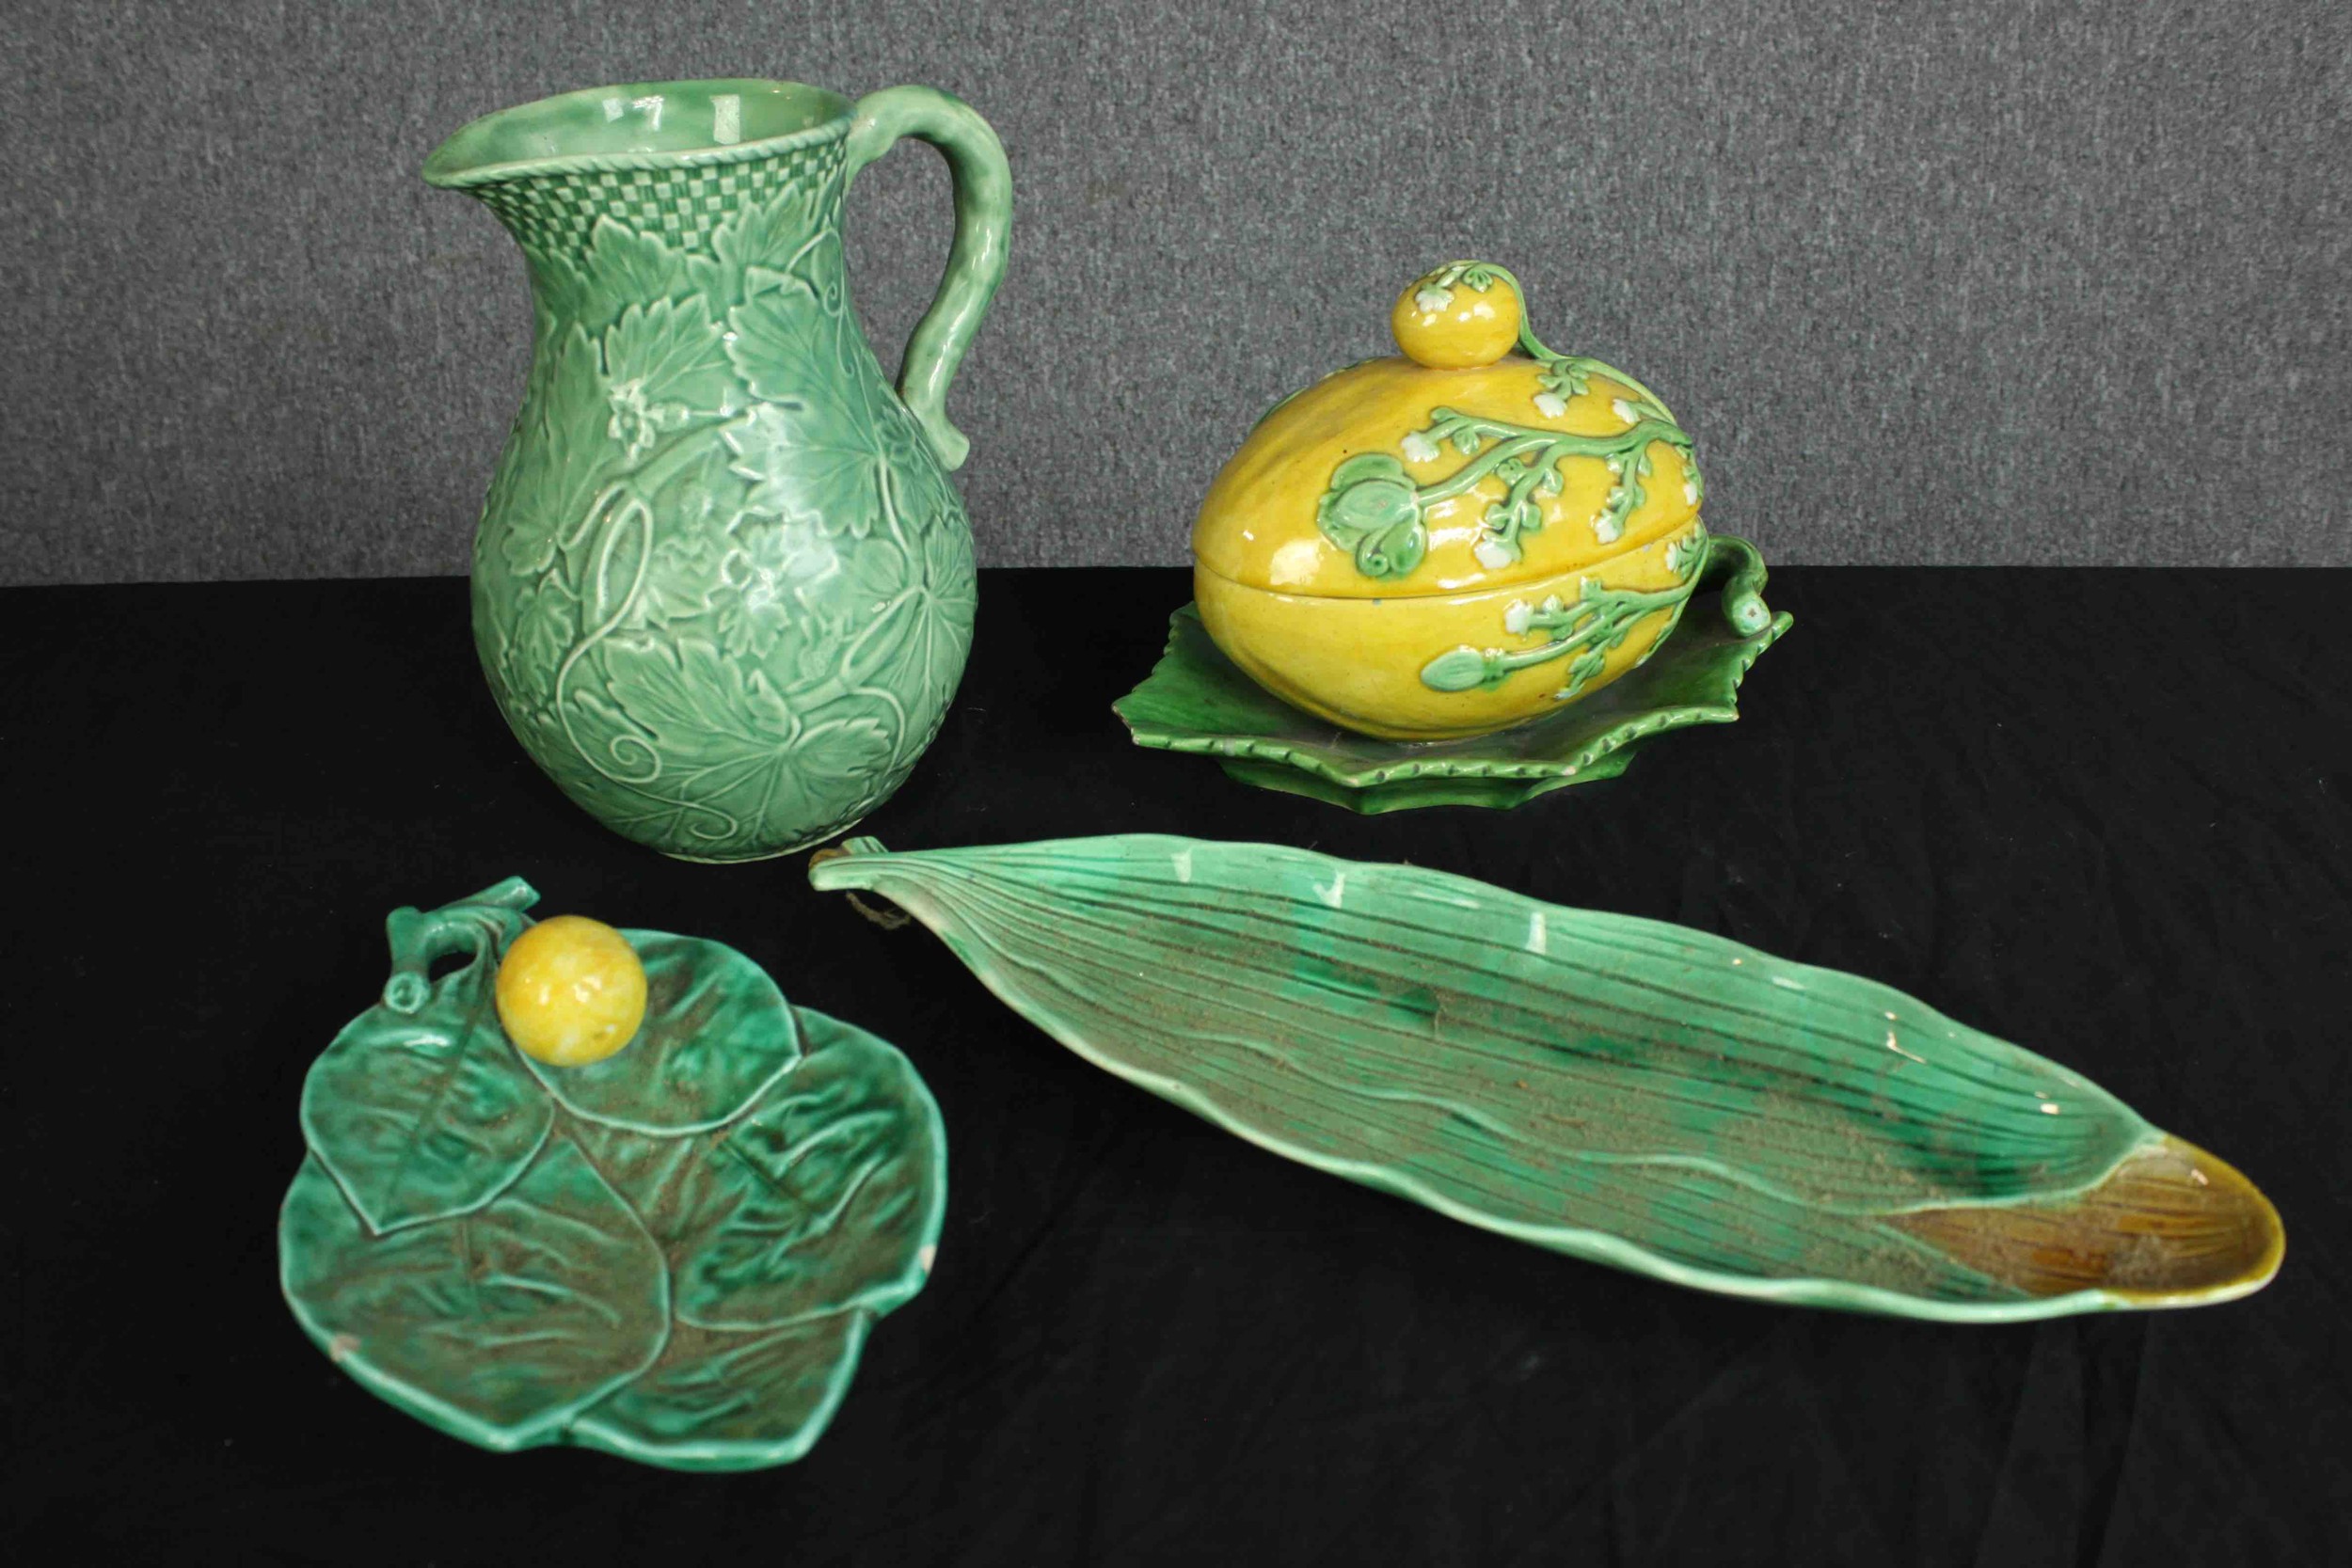 A collection of green and yellow porcelain made by 'L&H' Pottery. Two dishes, a jug, and a lemon